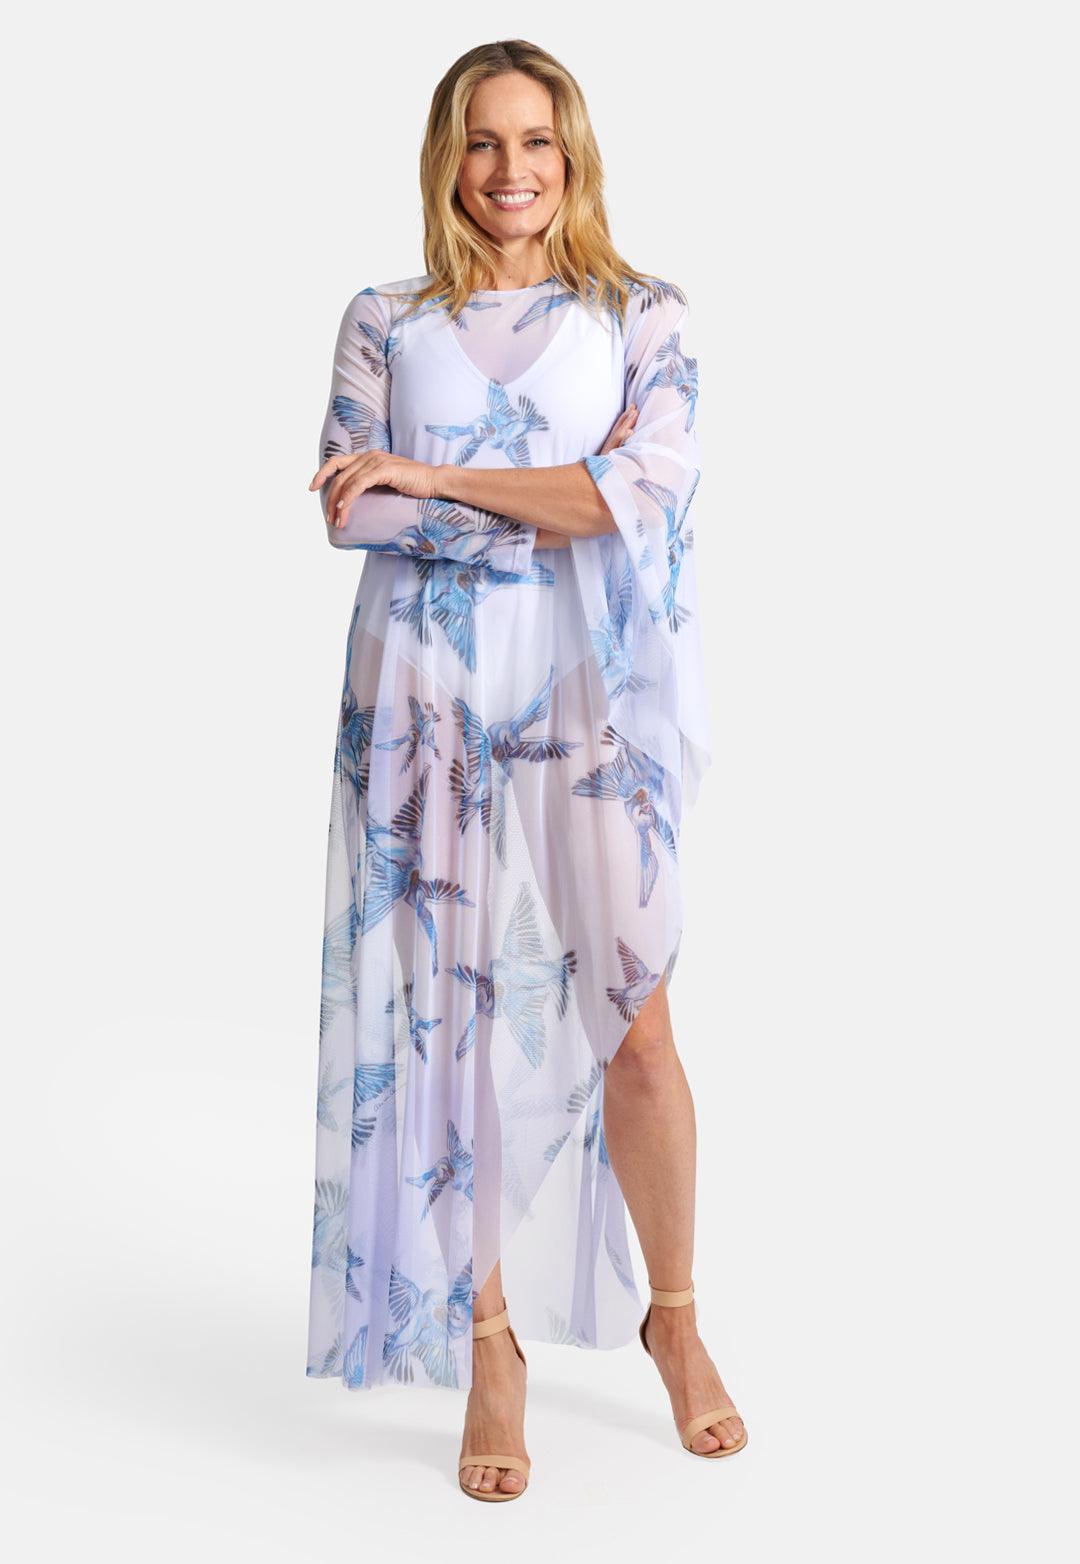 Model wearing mesh one sleeve lavender poncho with blue birds printed on it